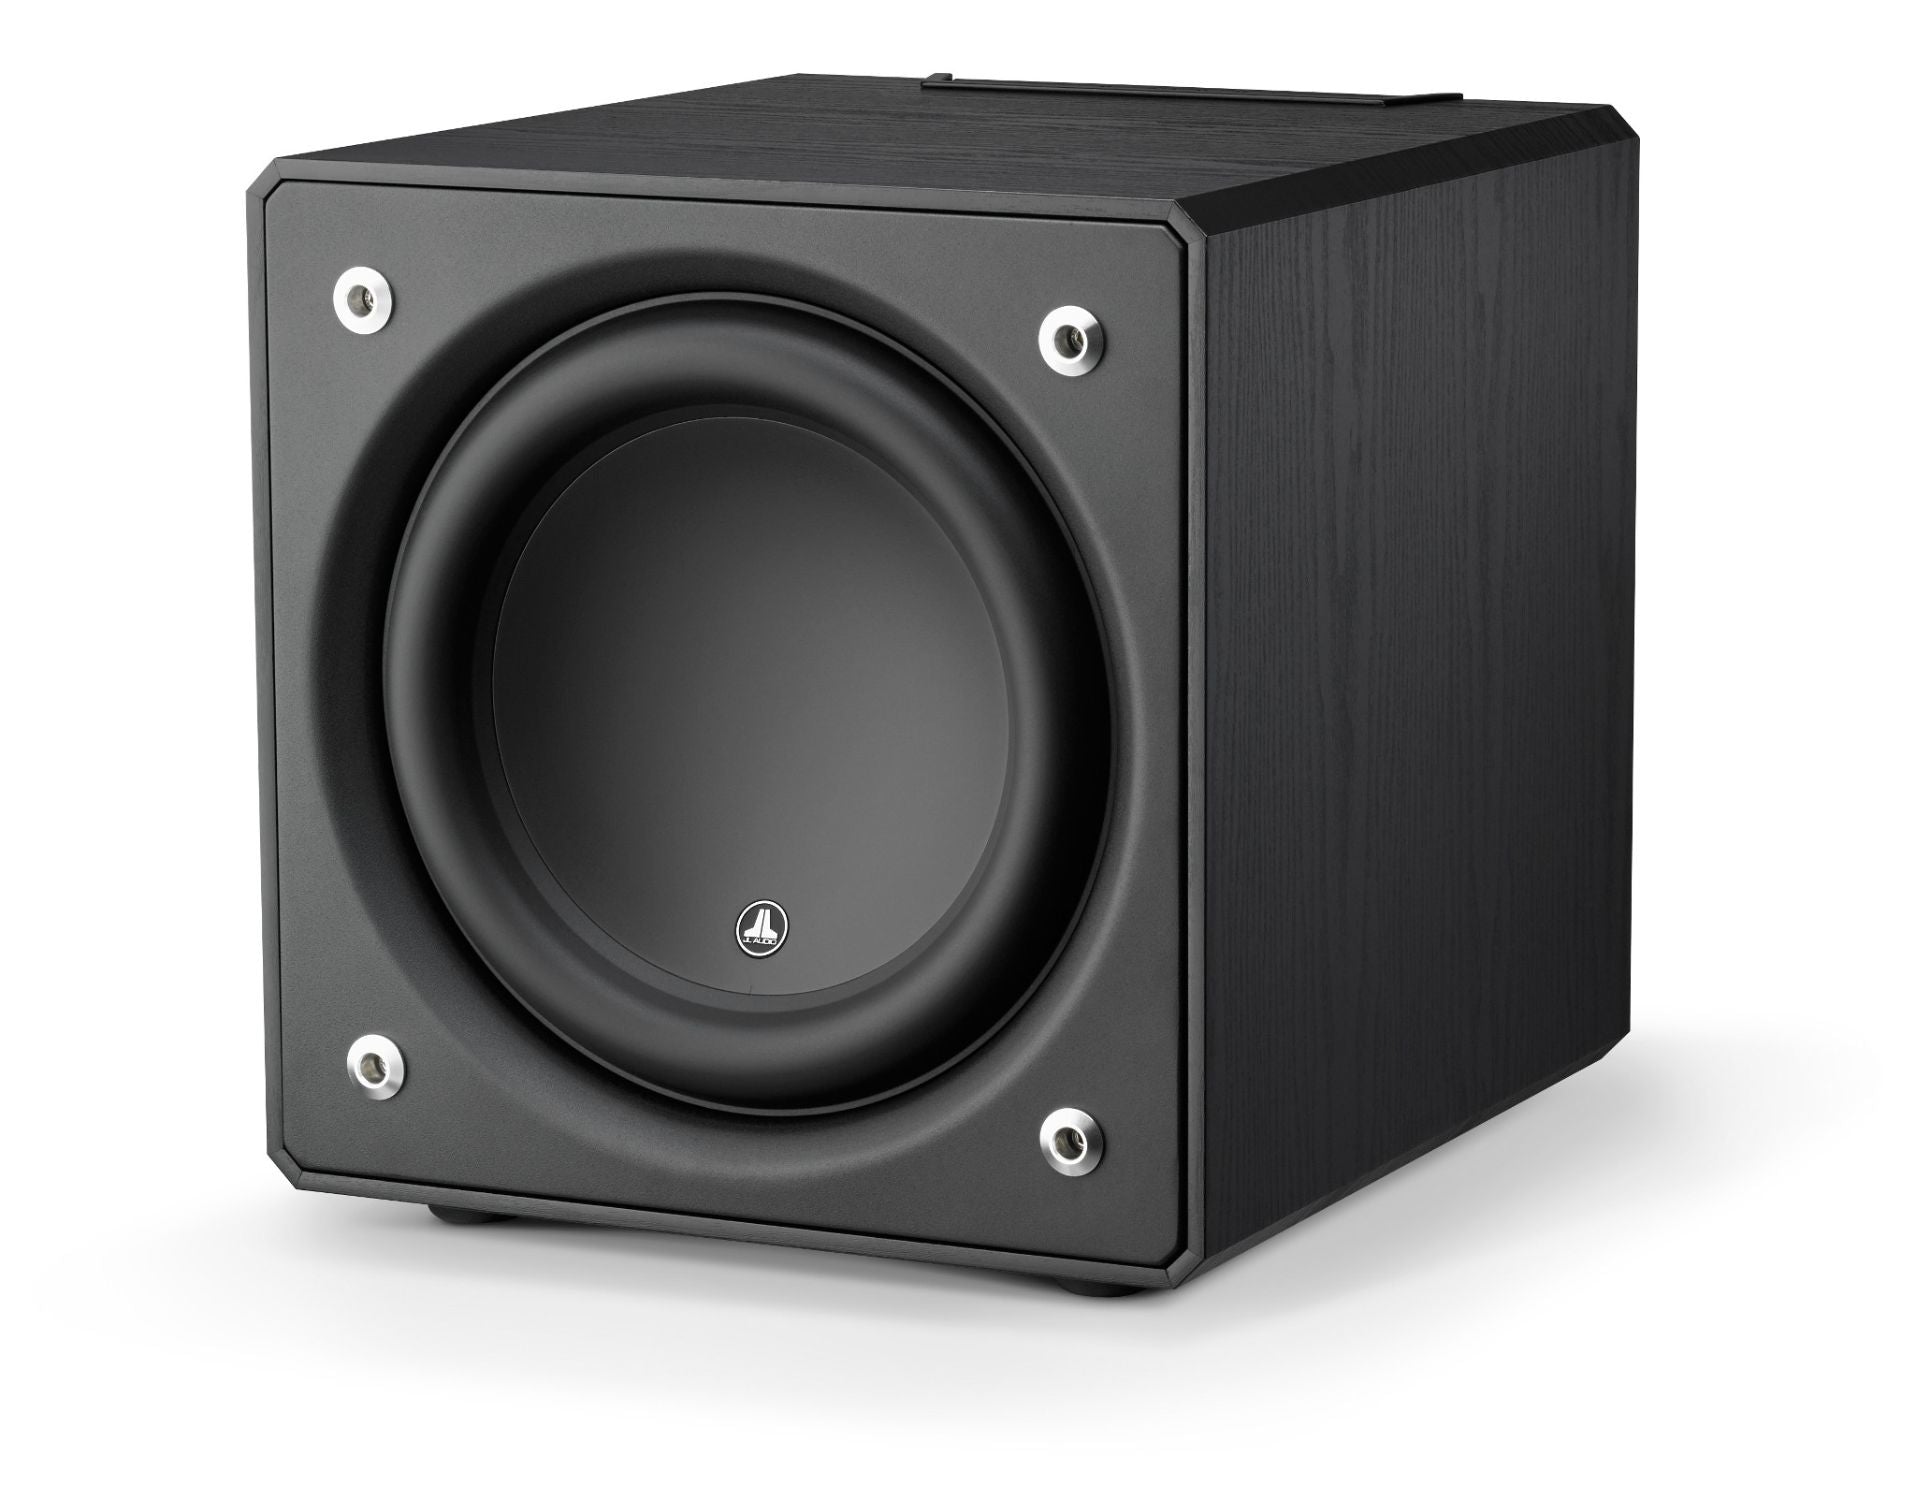 Michelangelo Udholdenhed at føre E-Sub - e112-ASH - Home Audio - Powered Subwoofers - JL Audio